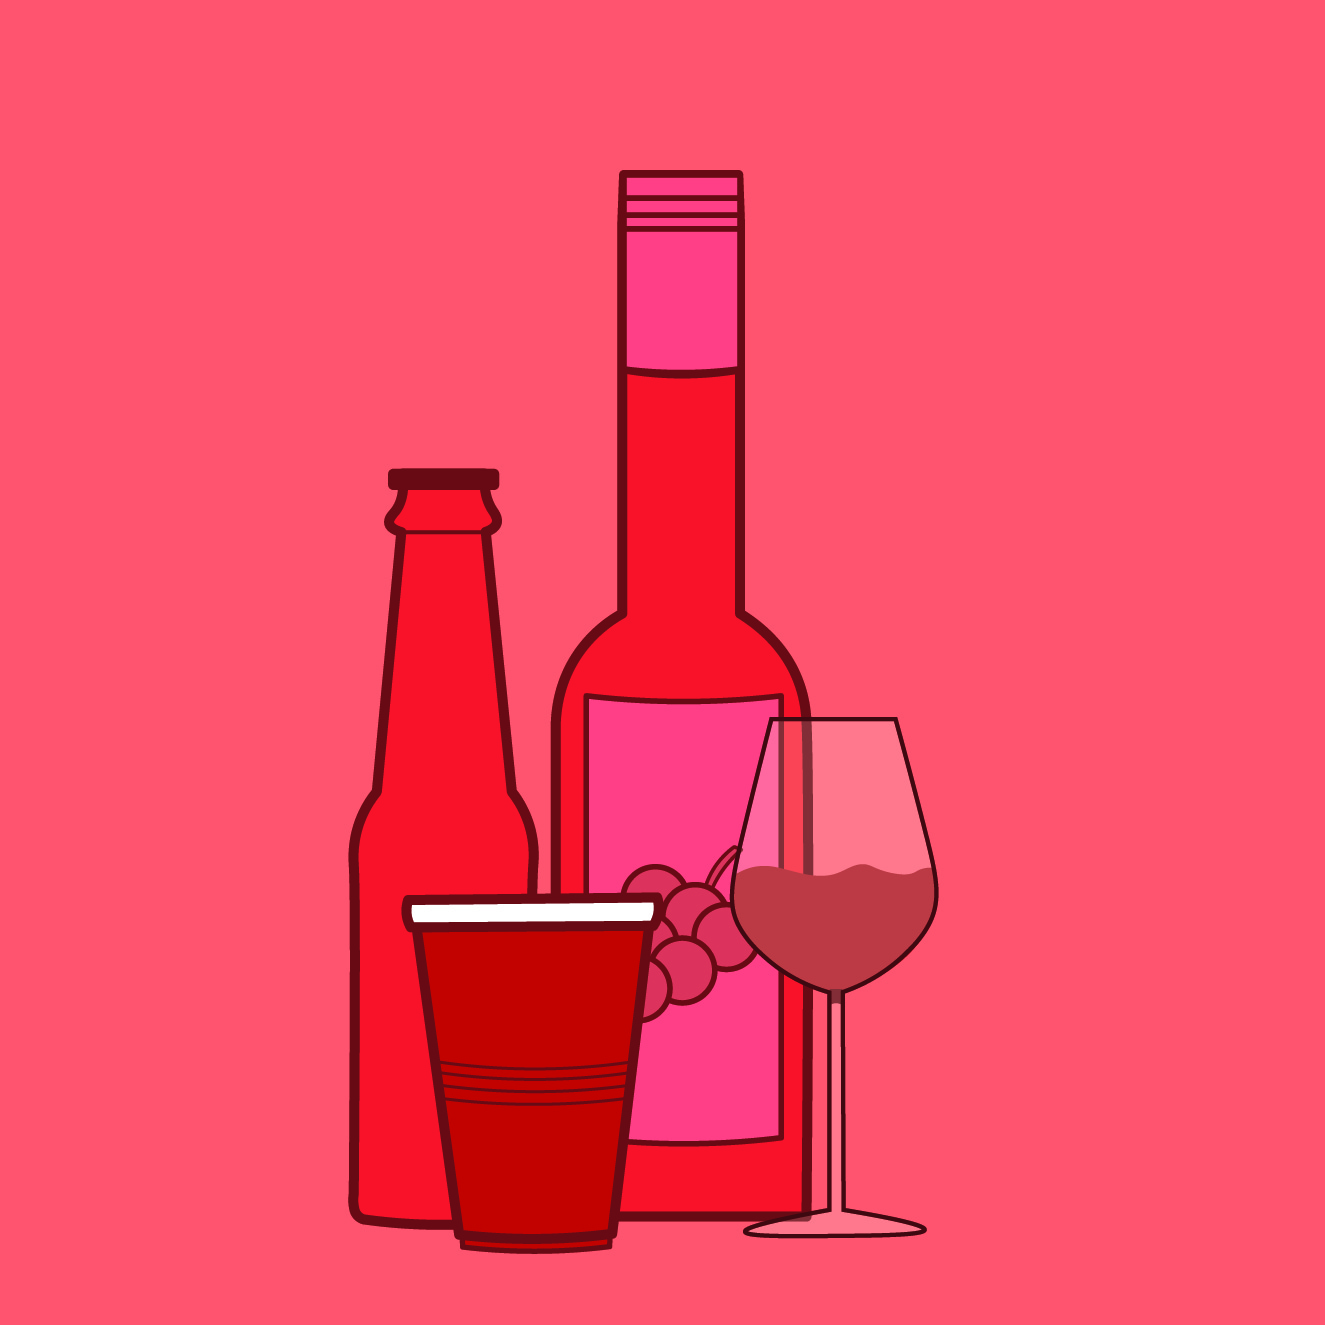 glass of alcohol, wine bottle, and other alcohol